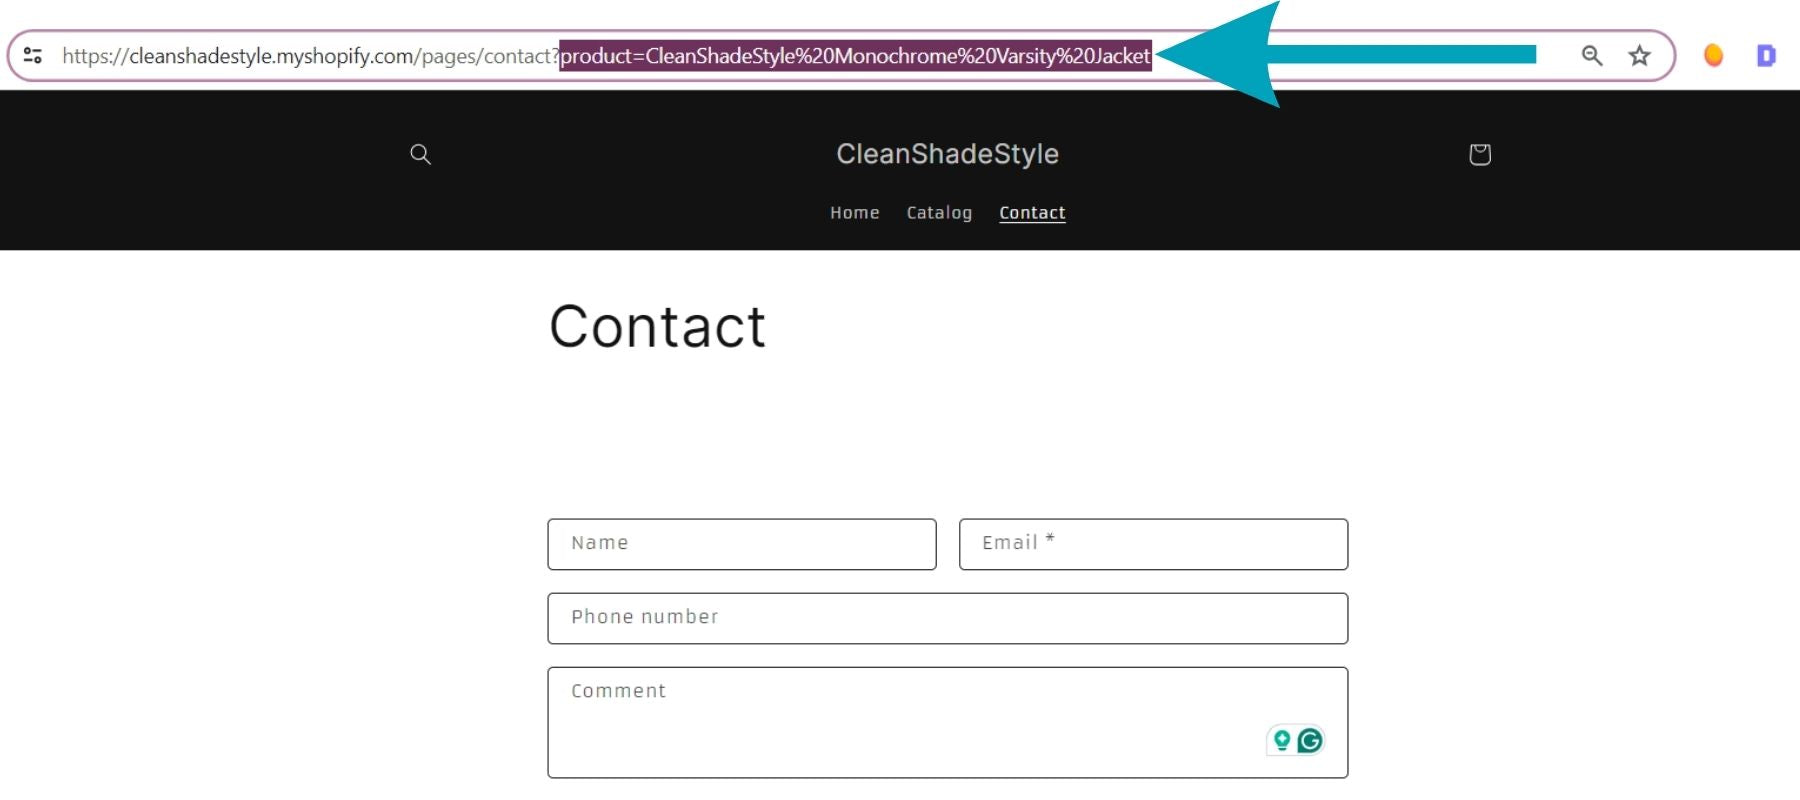 Automatically Inserting Product Names To Contact Form (Optional)